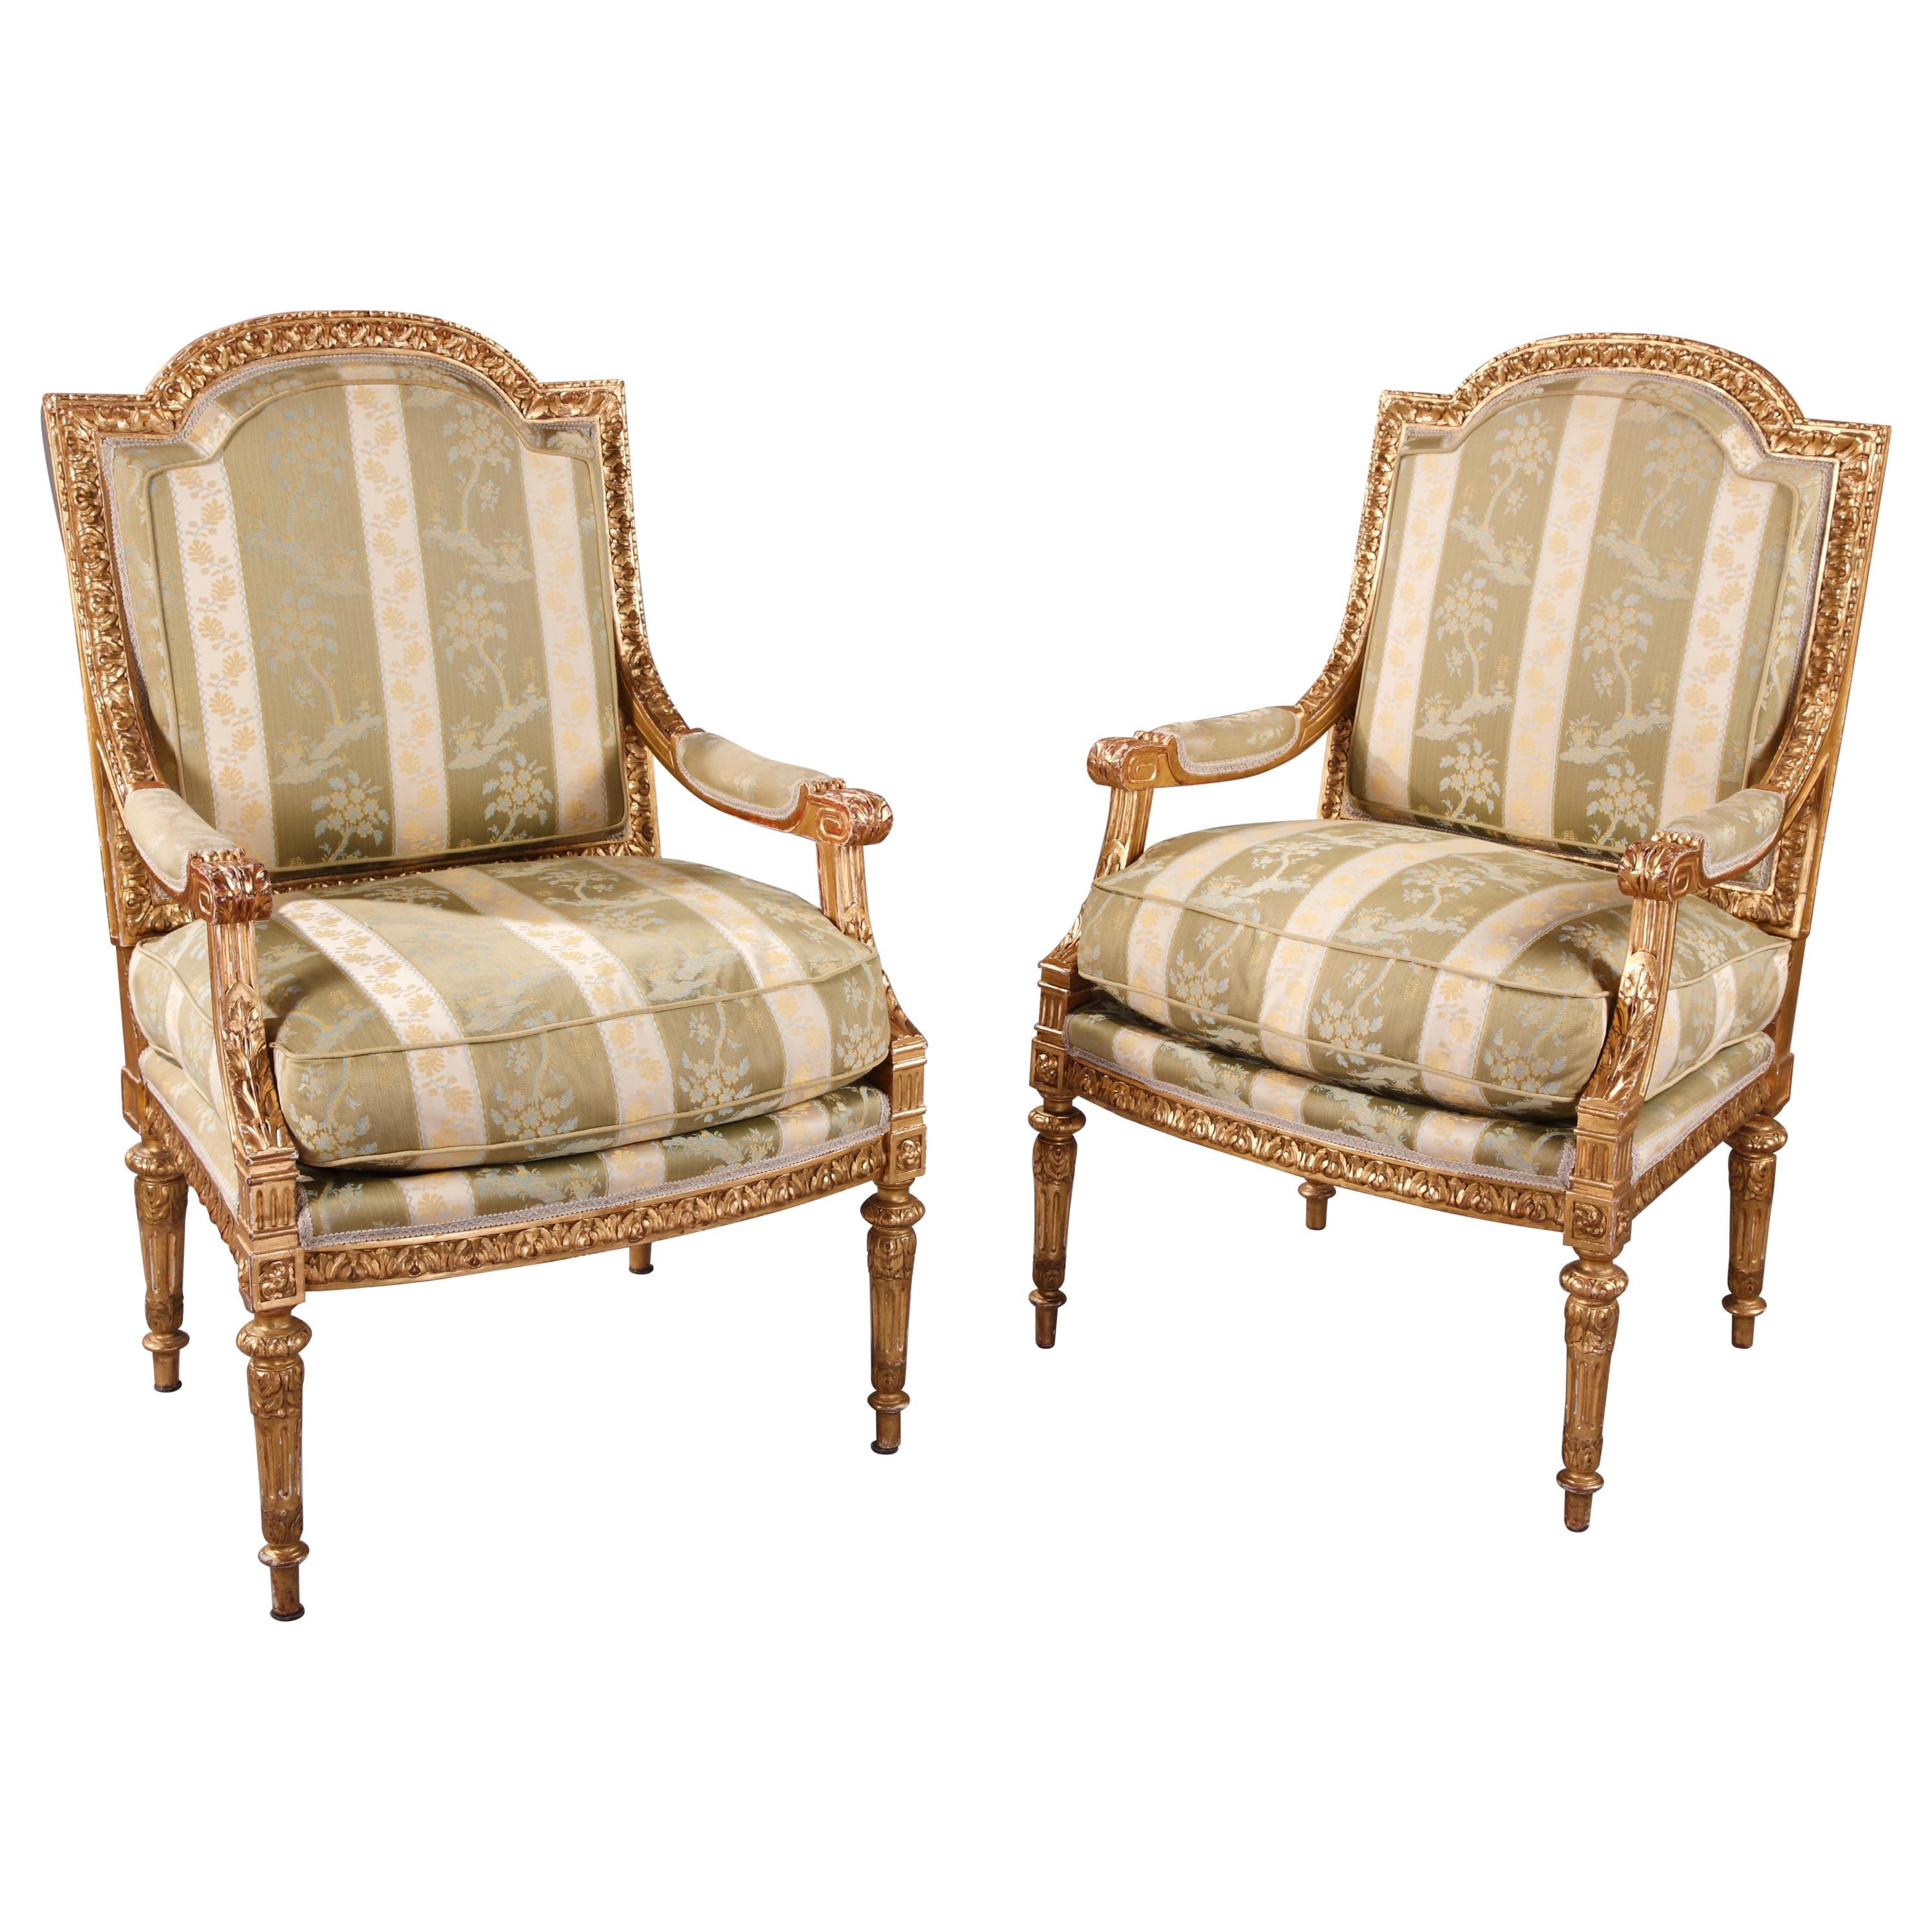 Pair of Louis XVI Style Armchairs After G. Jacob